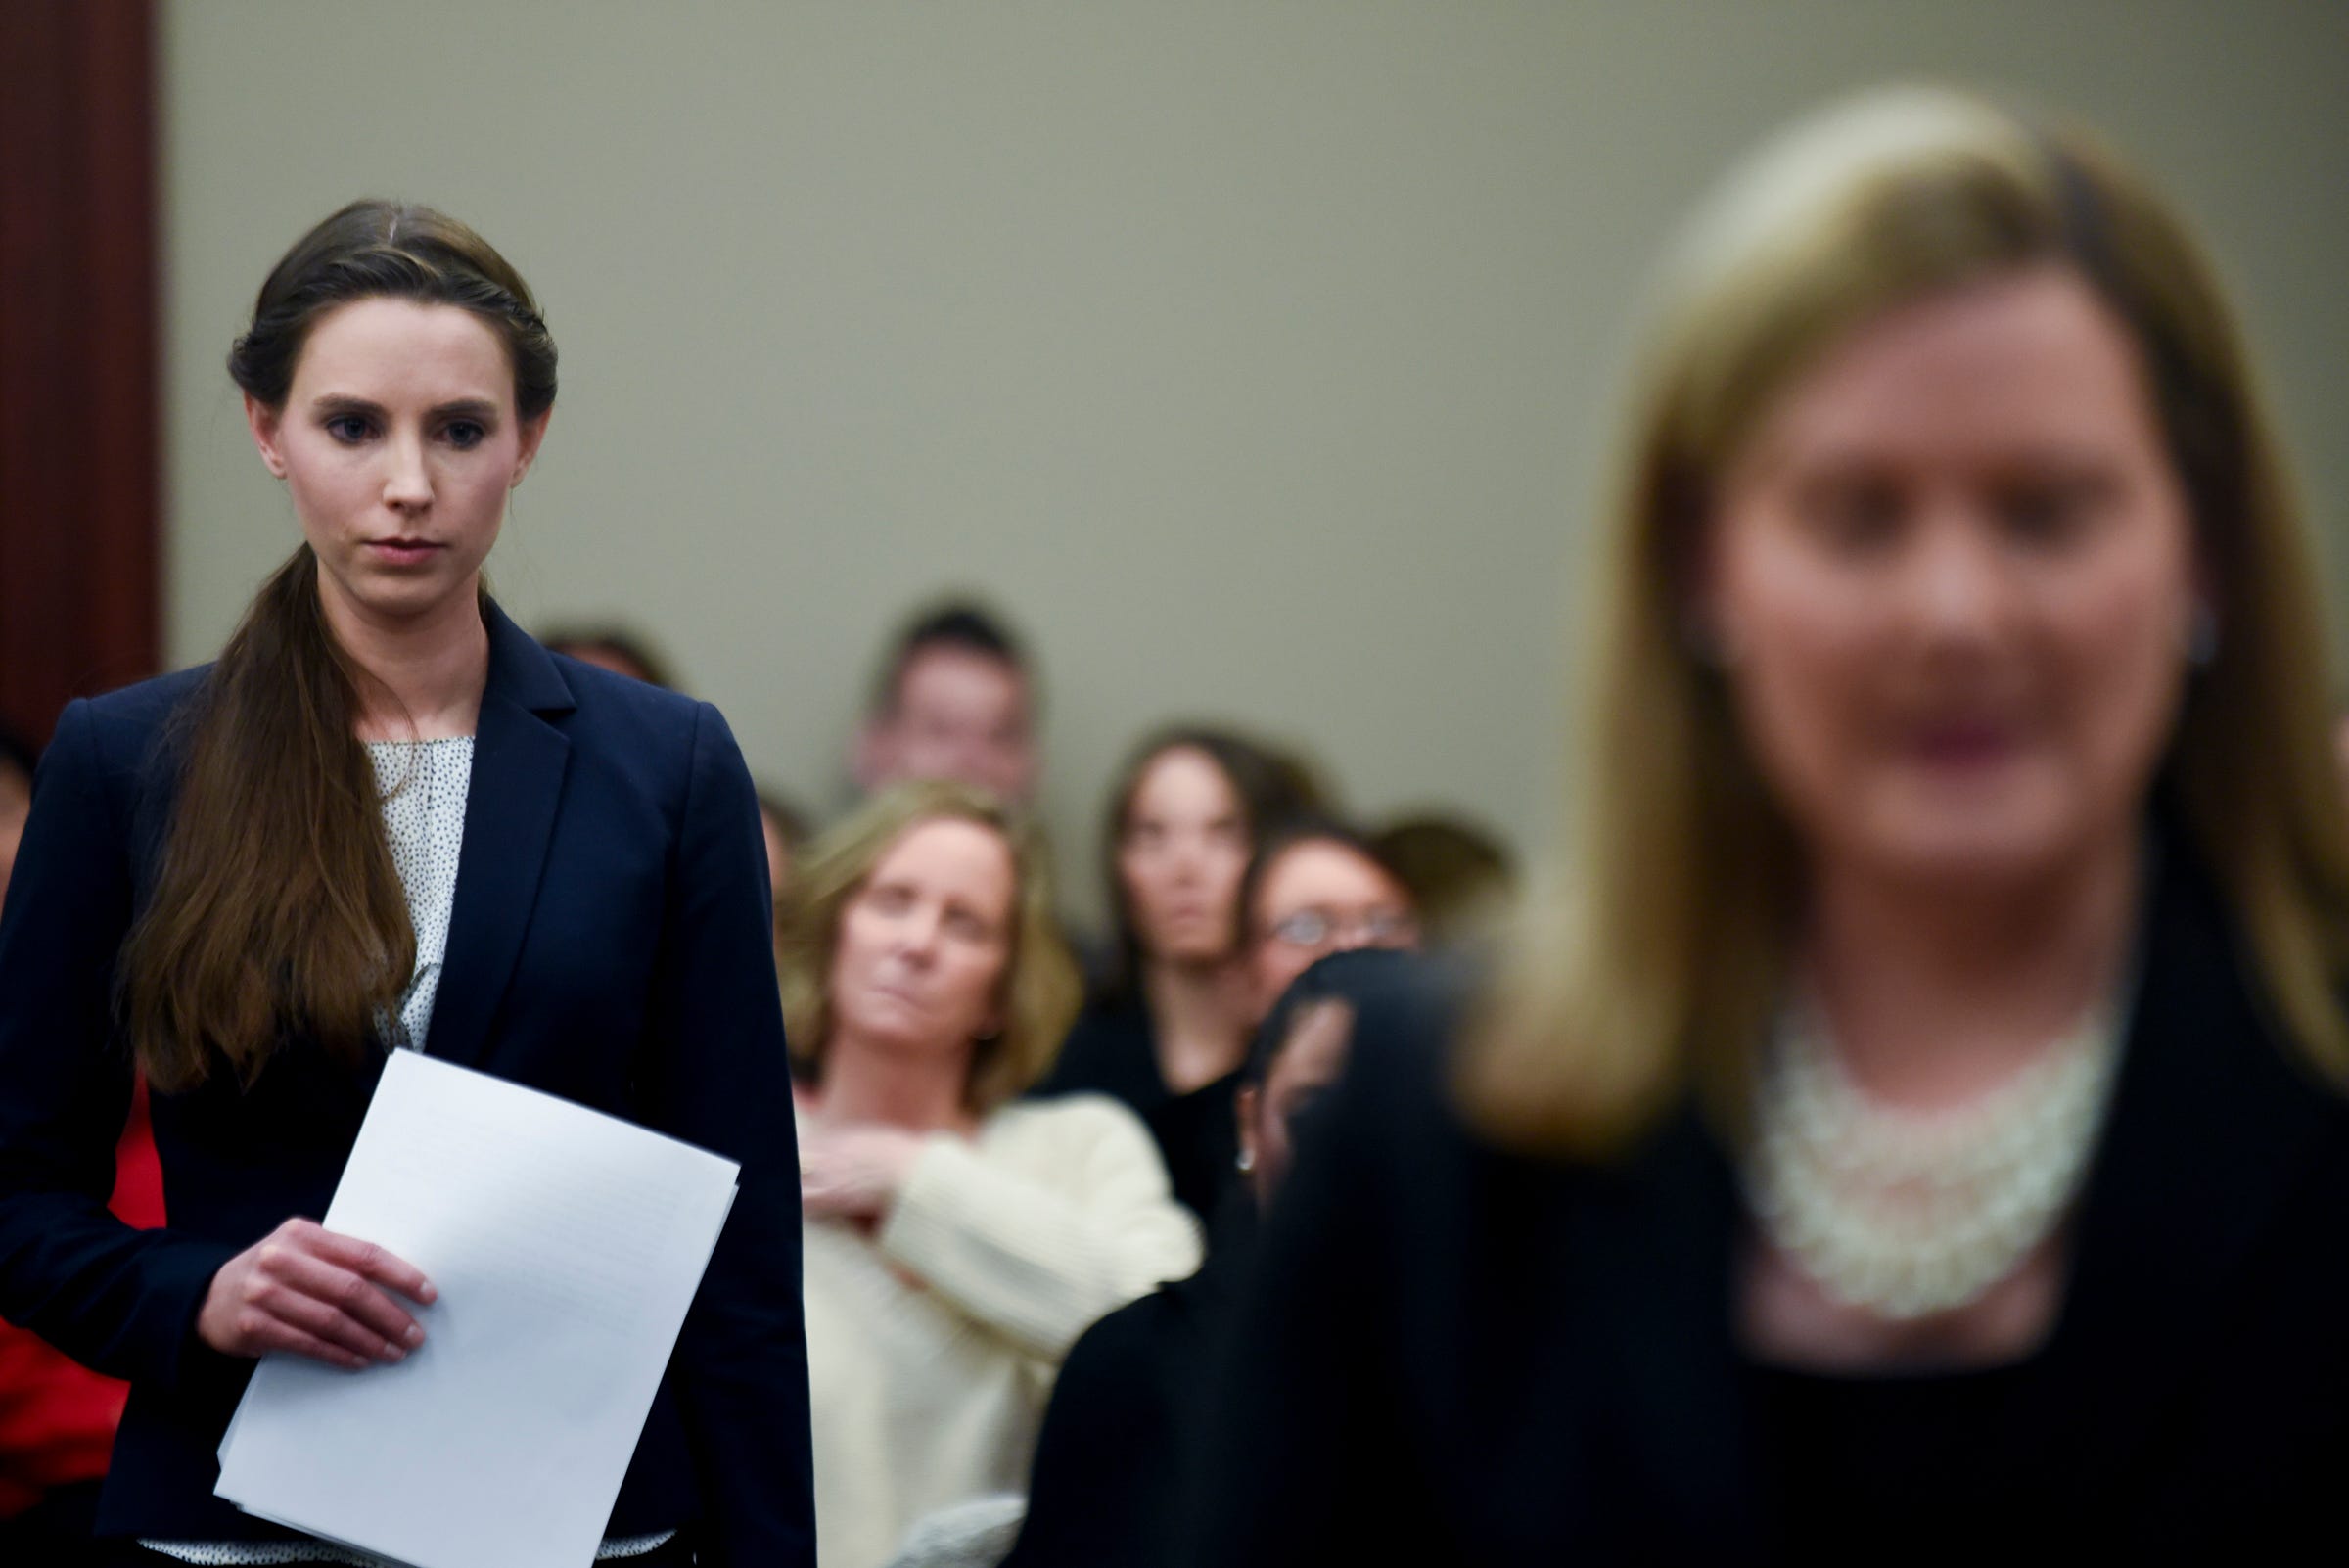 Rachael Denhollander, left, is introduced by Assistant Attorney General Angela Povaliatis, before she makes the final victim impact statement  Wednesday, Jan. 24, 2018, in Ingham County Circuit Court.